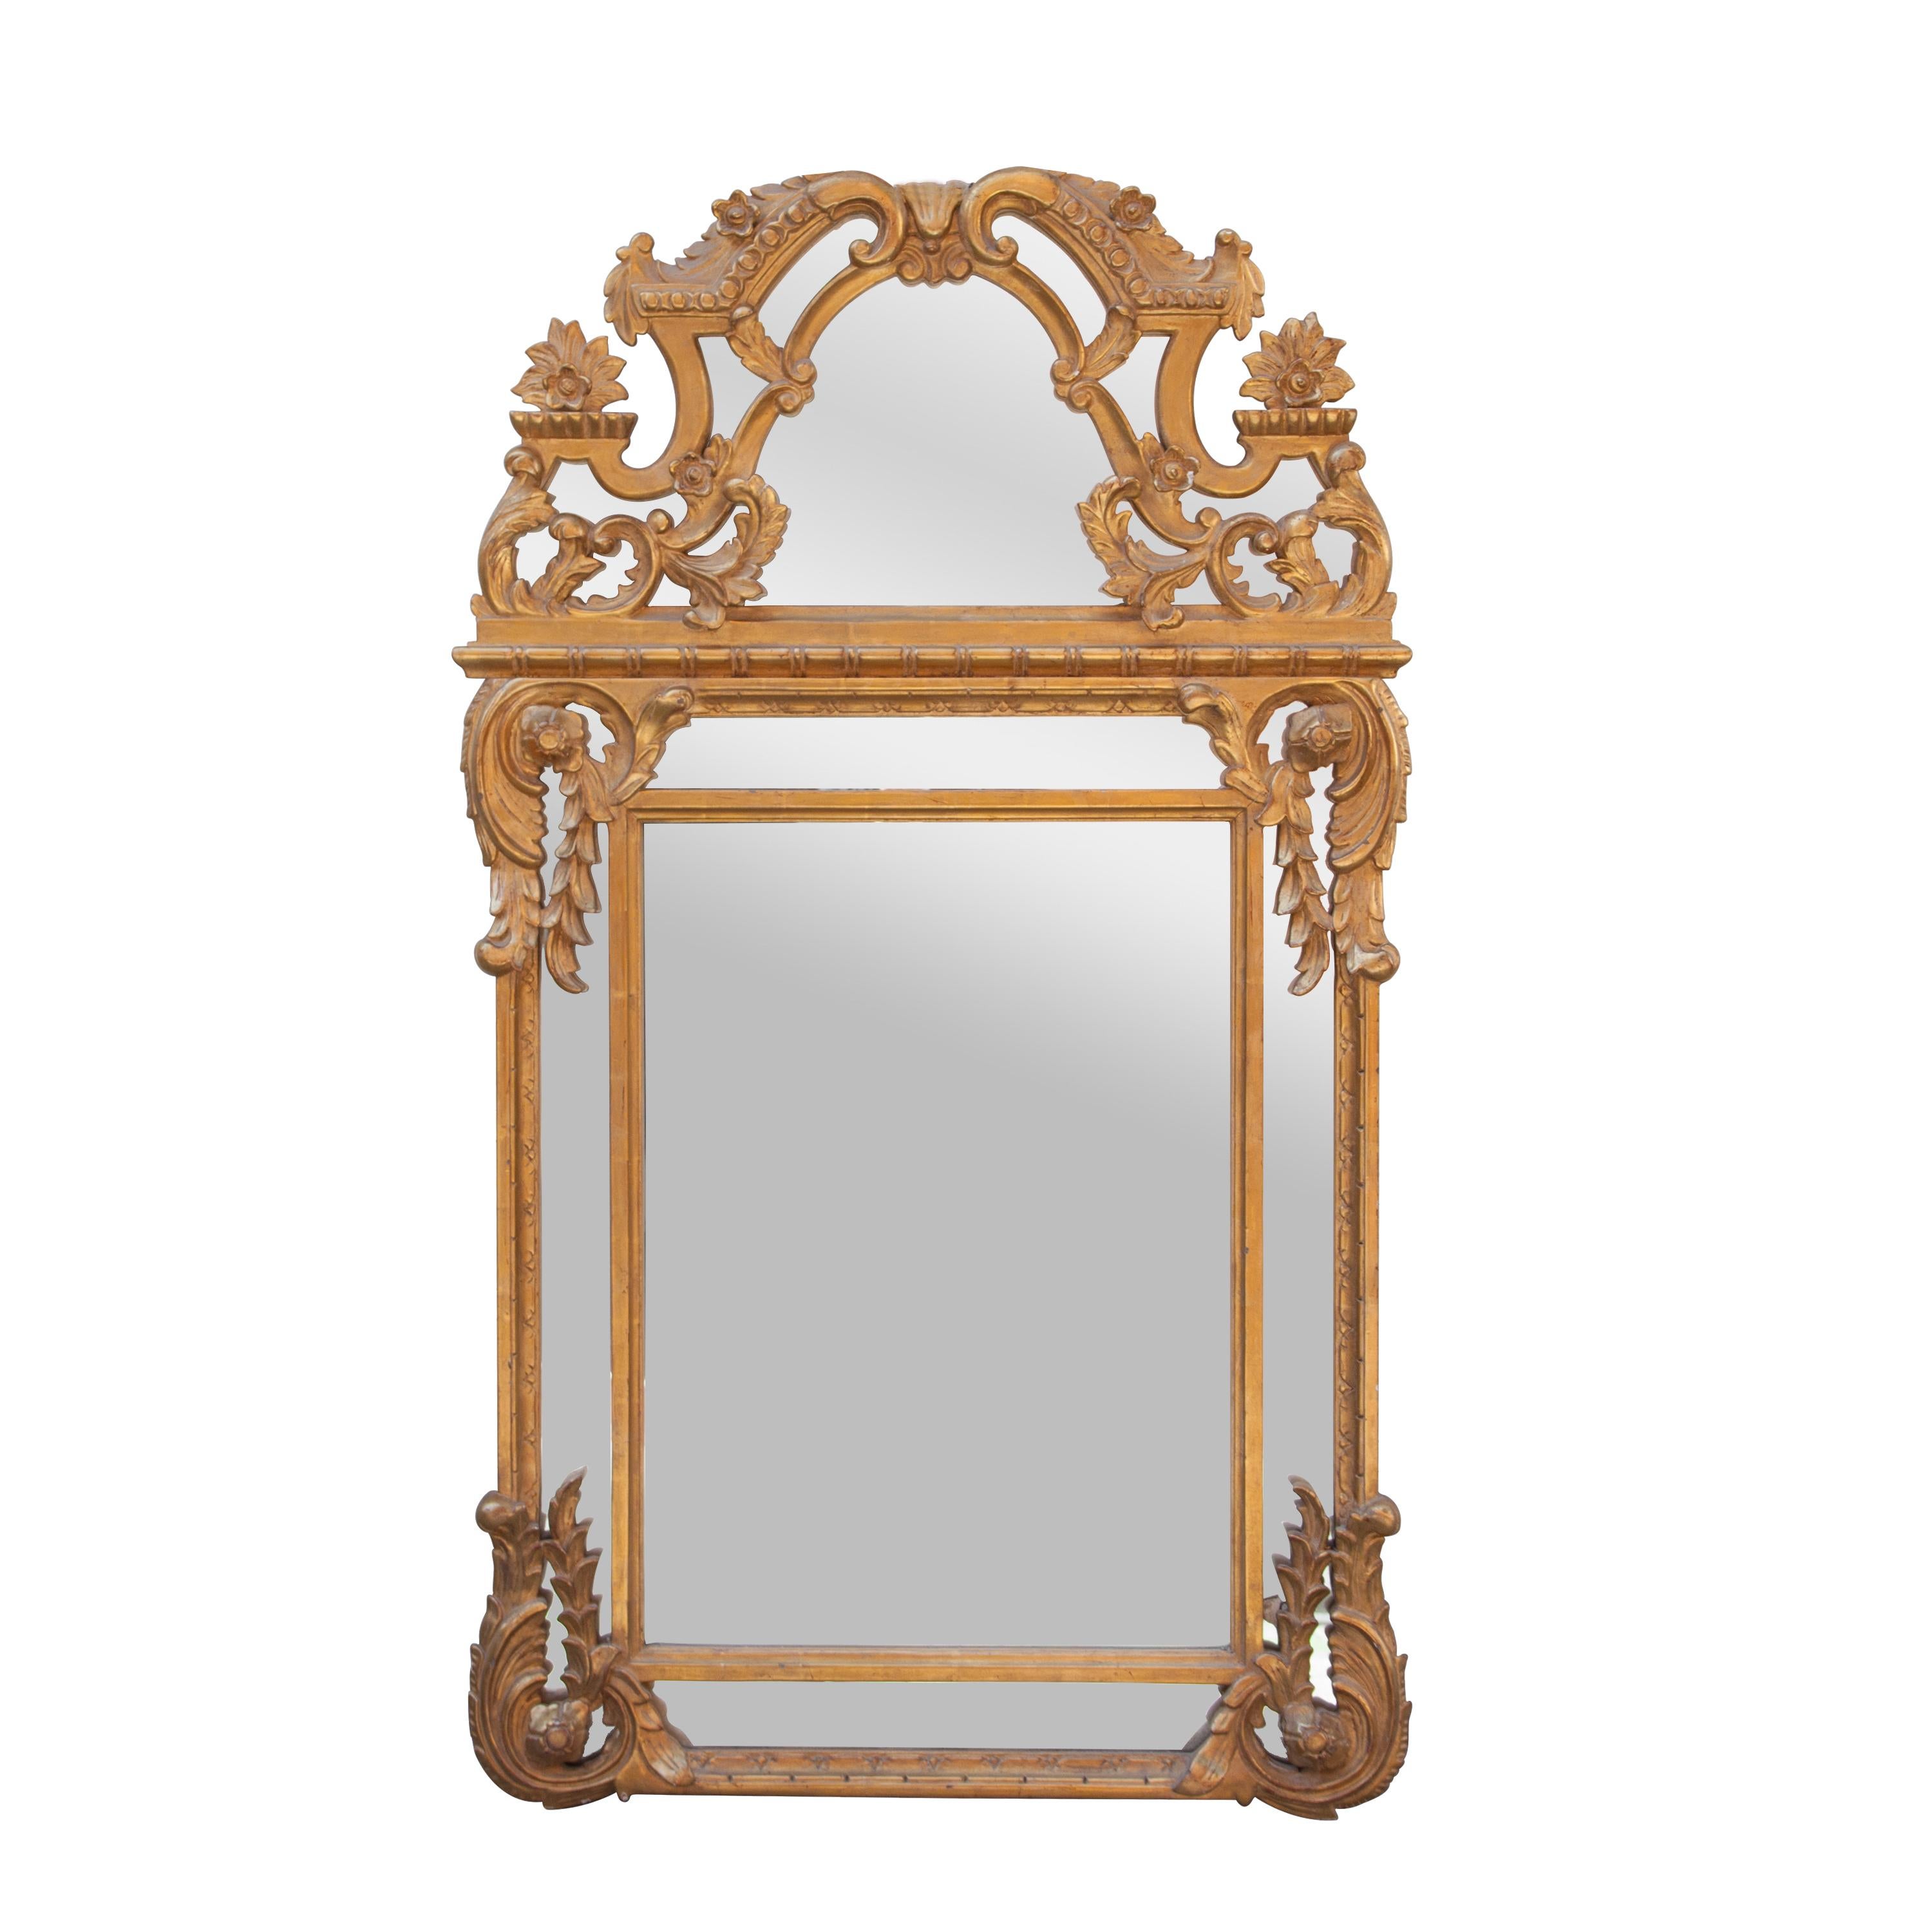 Neoclassical Rectangular Gold Foil Hand Carved Wooden Mirror, 1970 For Sale